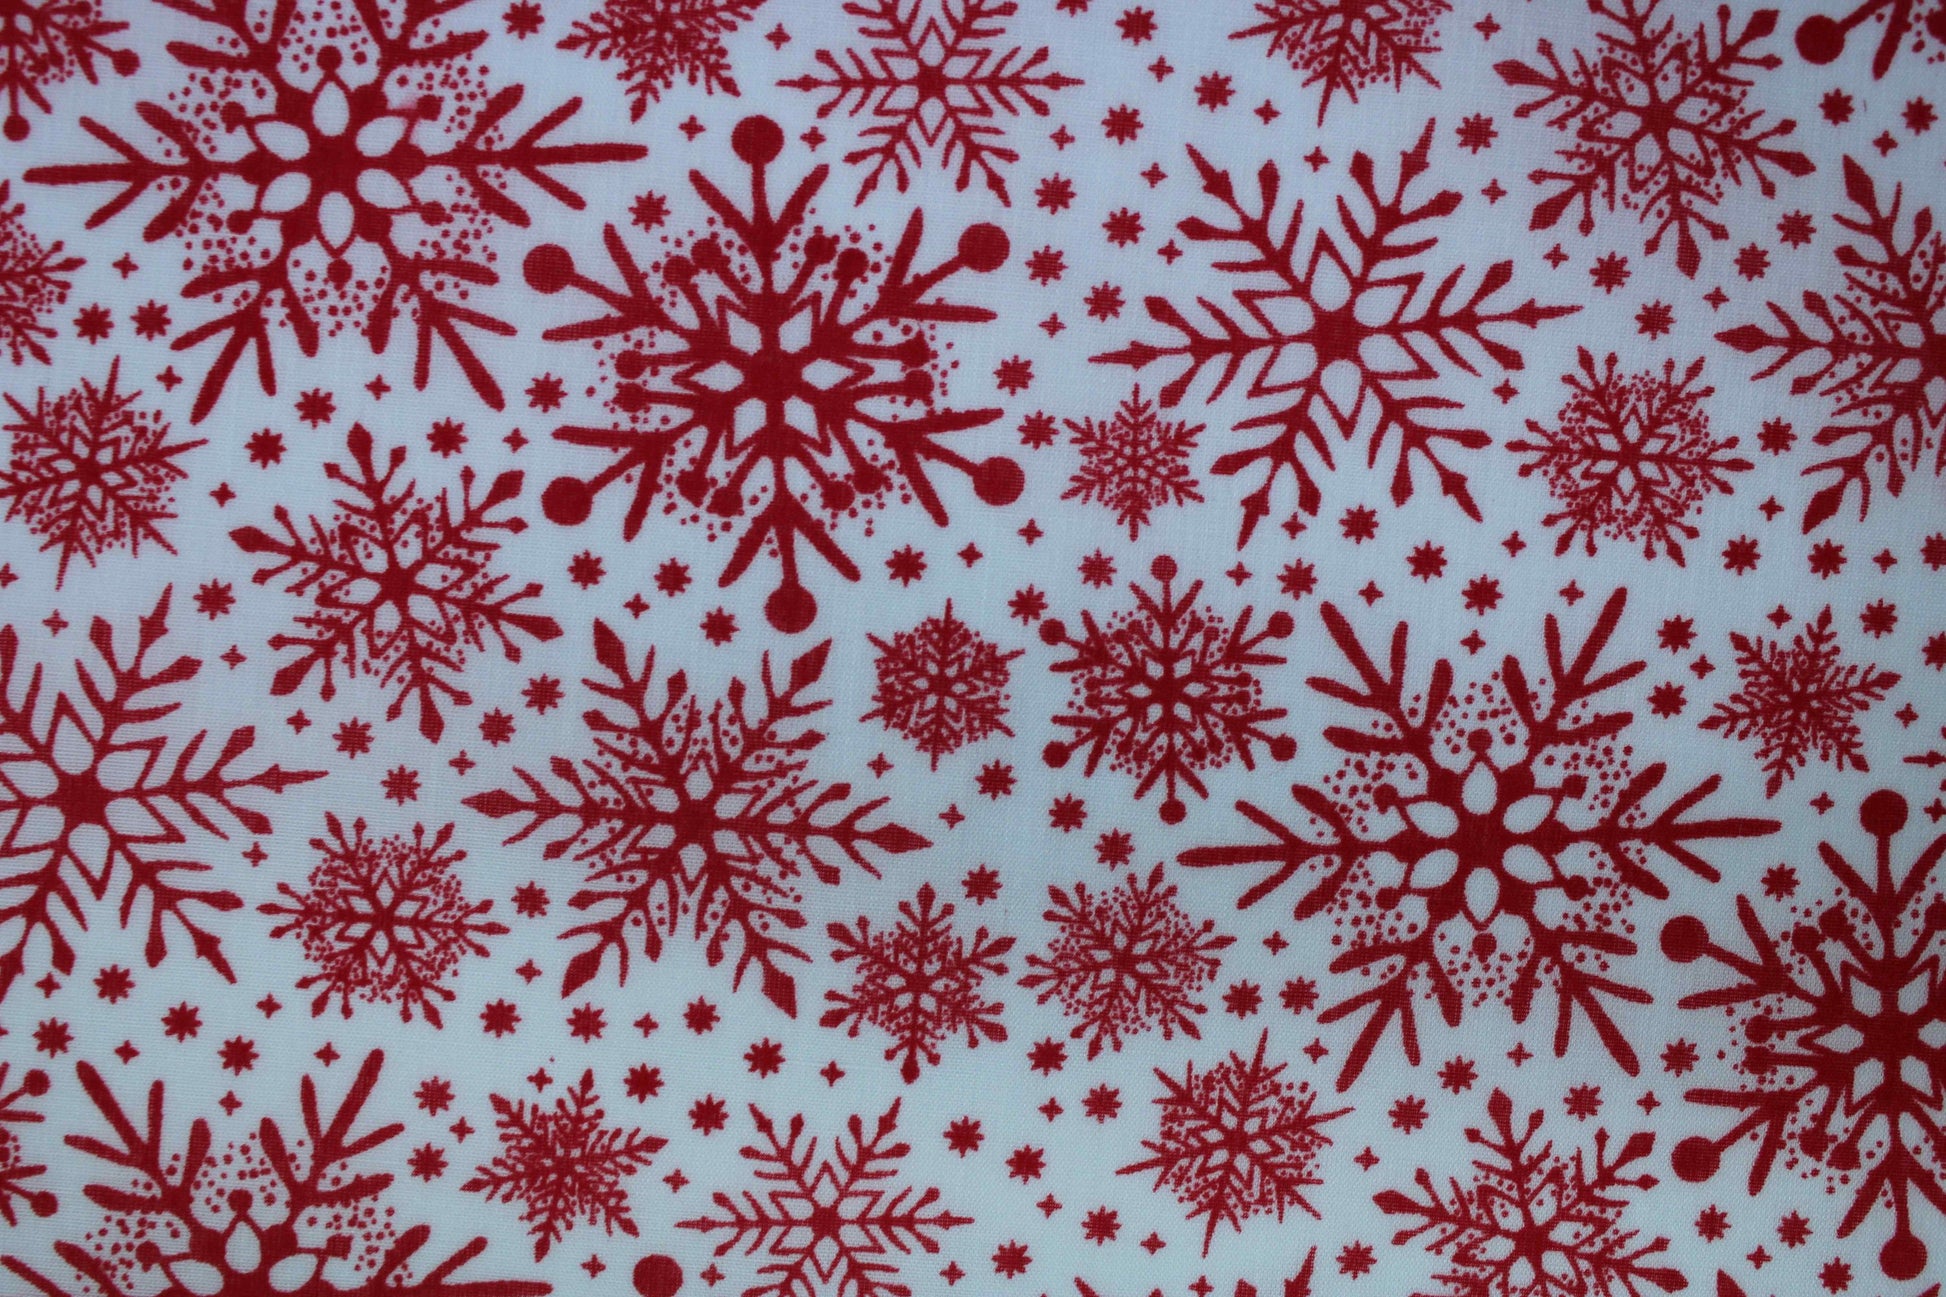 Various red snowflake designs on white background fabric